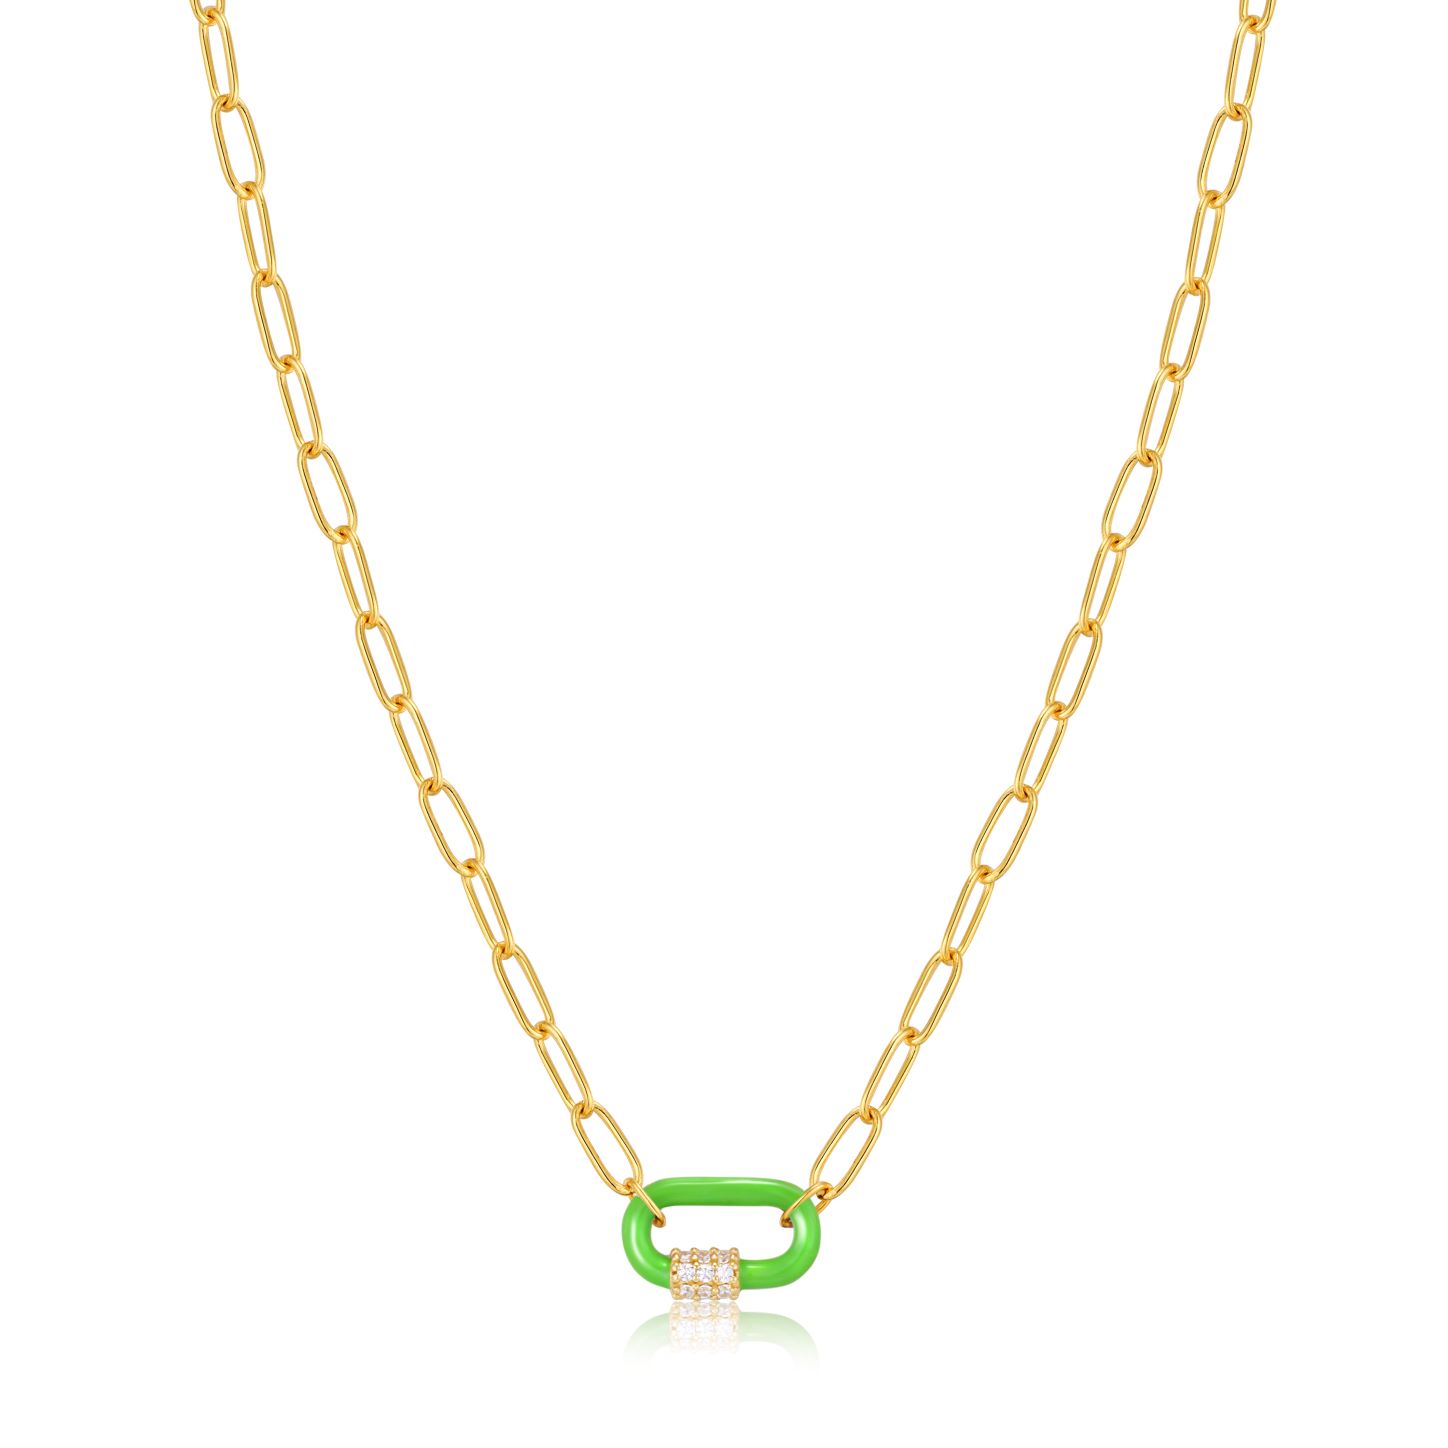 925 14KGP Neon Green Enamel Carabiner Gold Necklace Ania haie